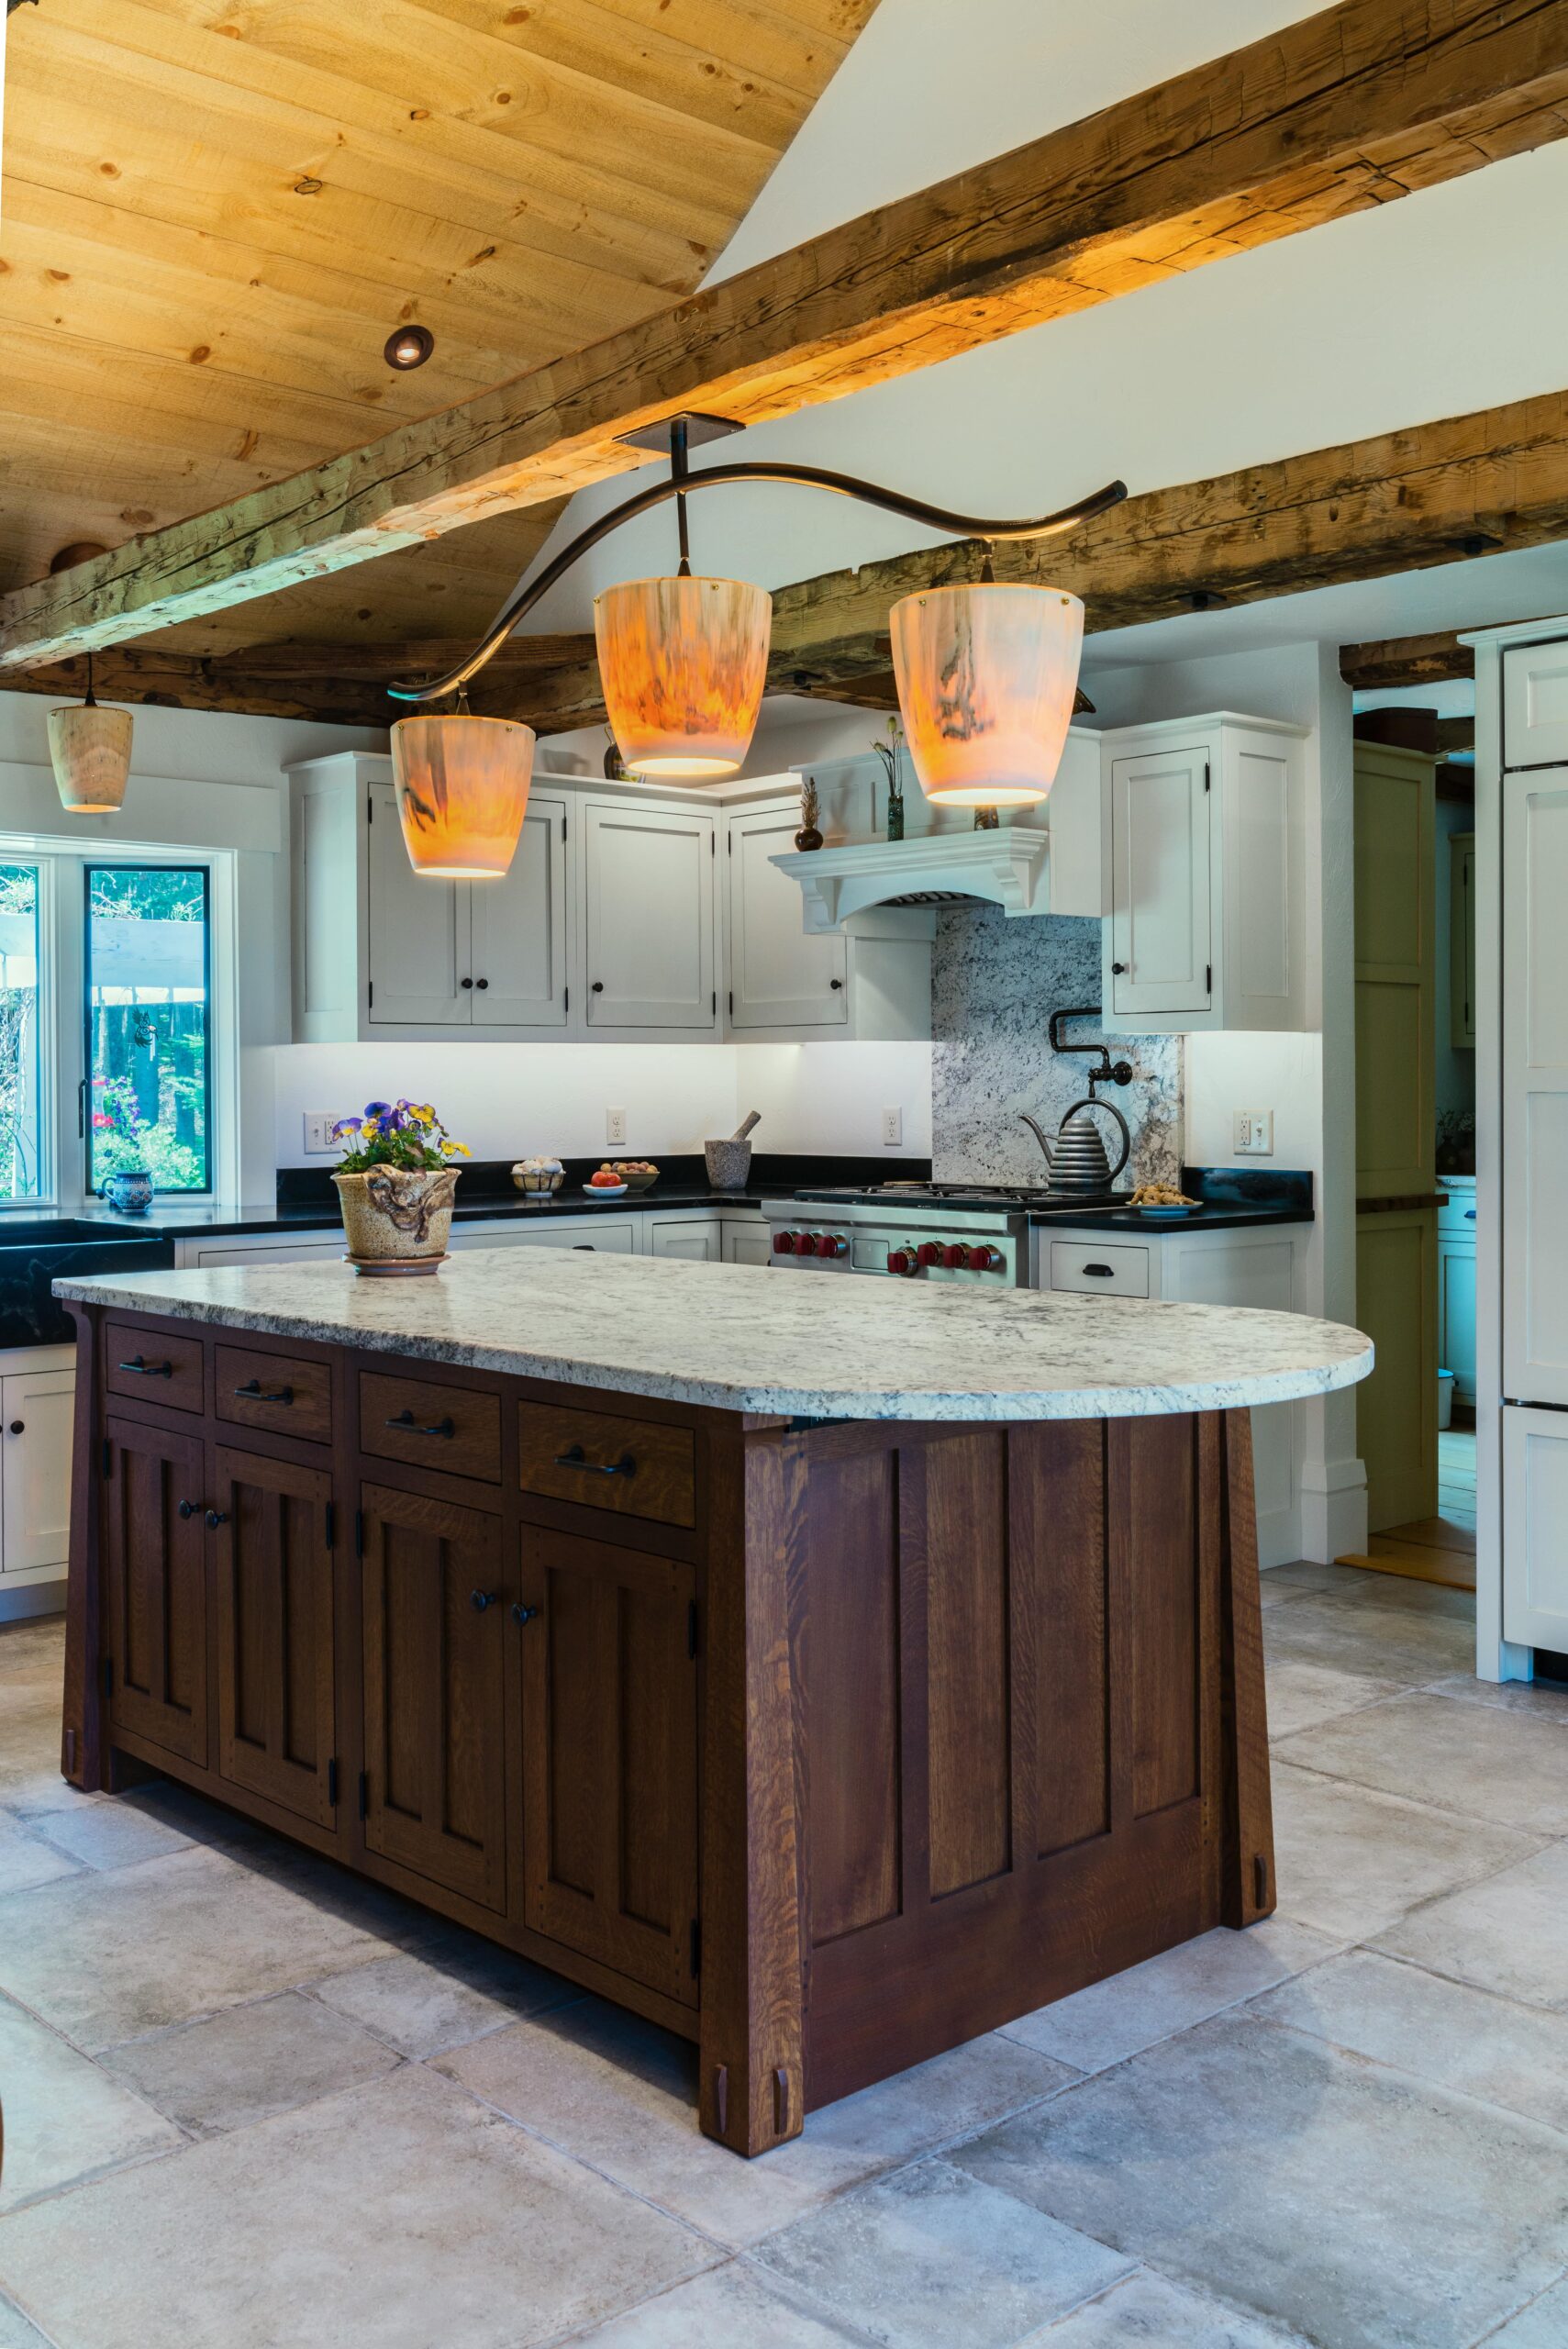 Large kitchen remodel with natural wood ceiling beams and granite island